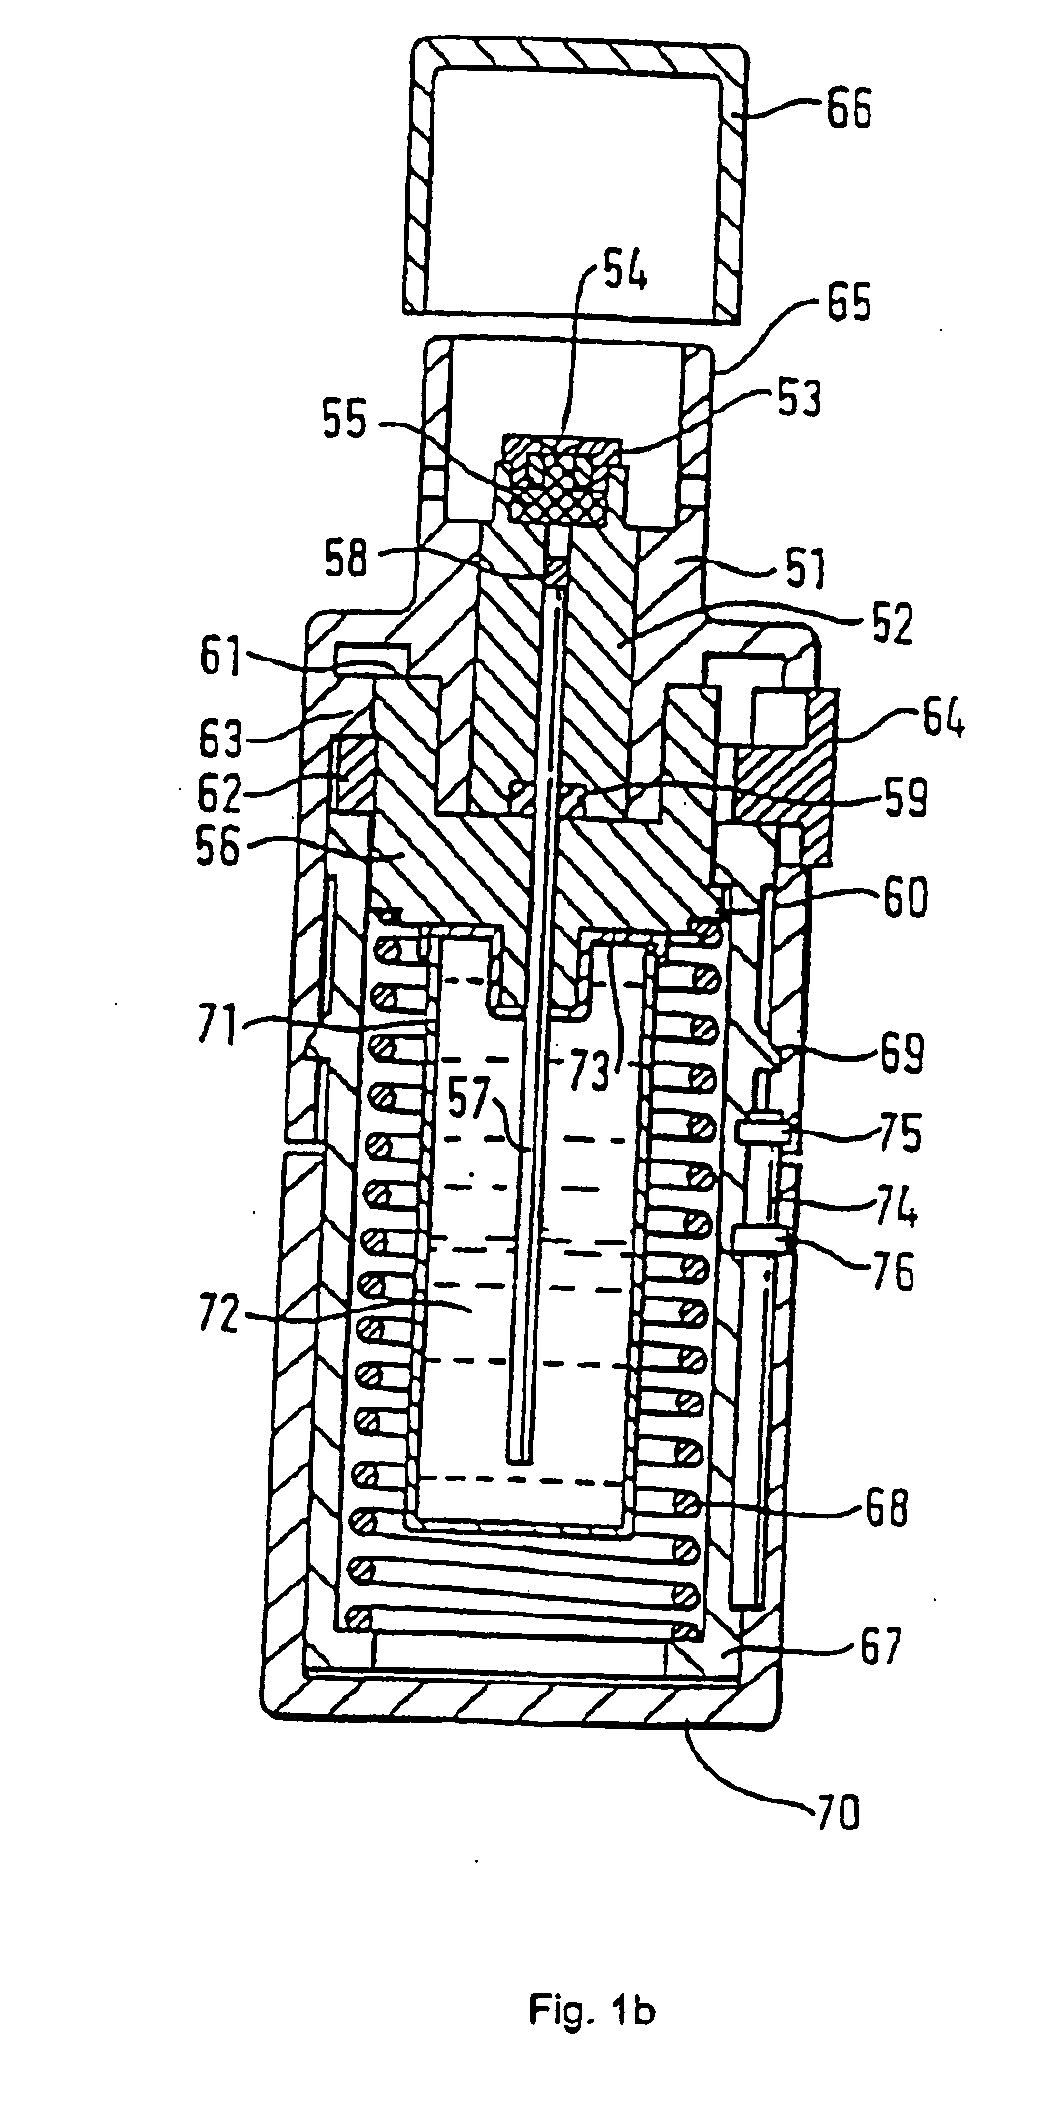 Nozzle-system for a dispenser for fluids consisting of a nozzle and a nozzle-holder and/or screw cap